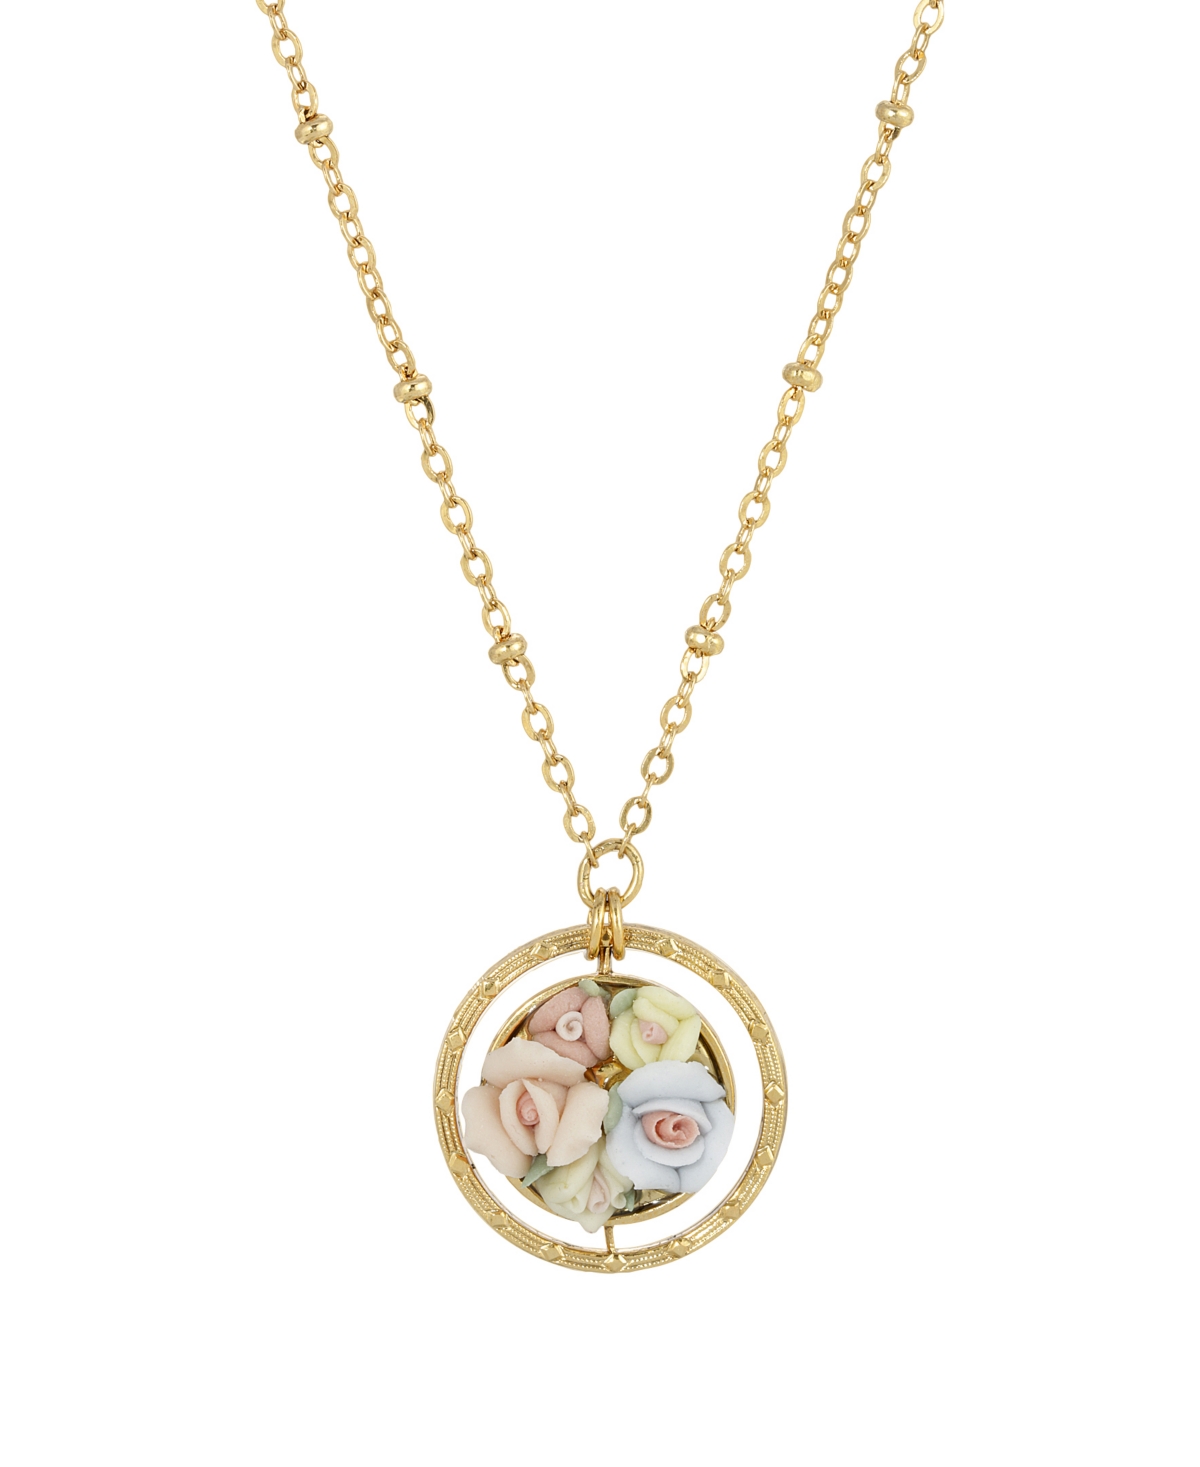 2028 Women's Gold Tone Yellow Porcelain Flower Round Drop Necklace In Pink